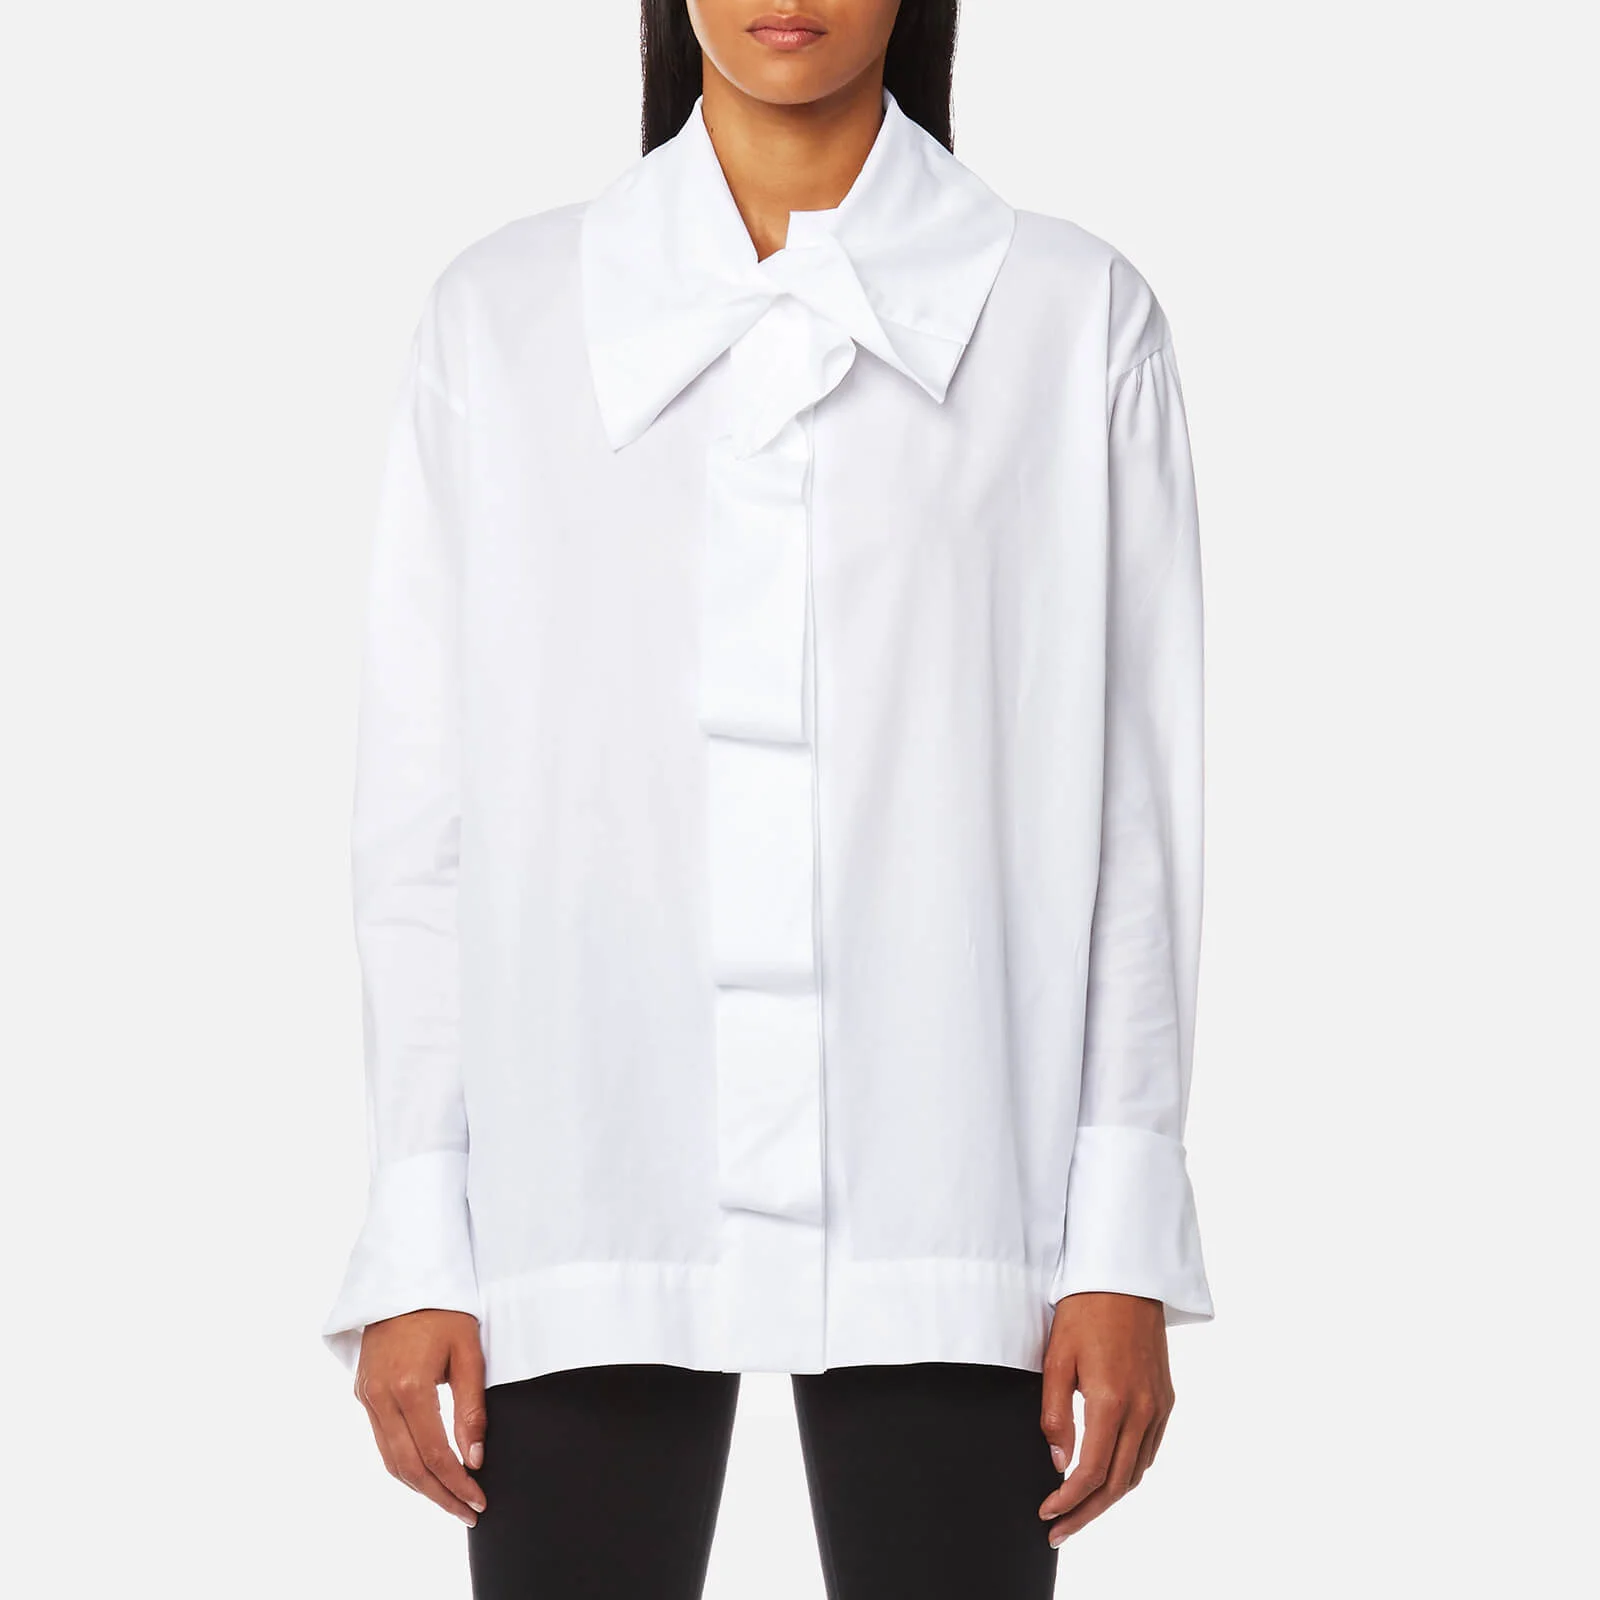 Vivienne Westwood Anglomania Women's Cavendish Blouse - Optical White Image 1